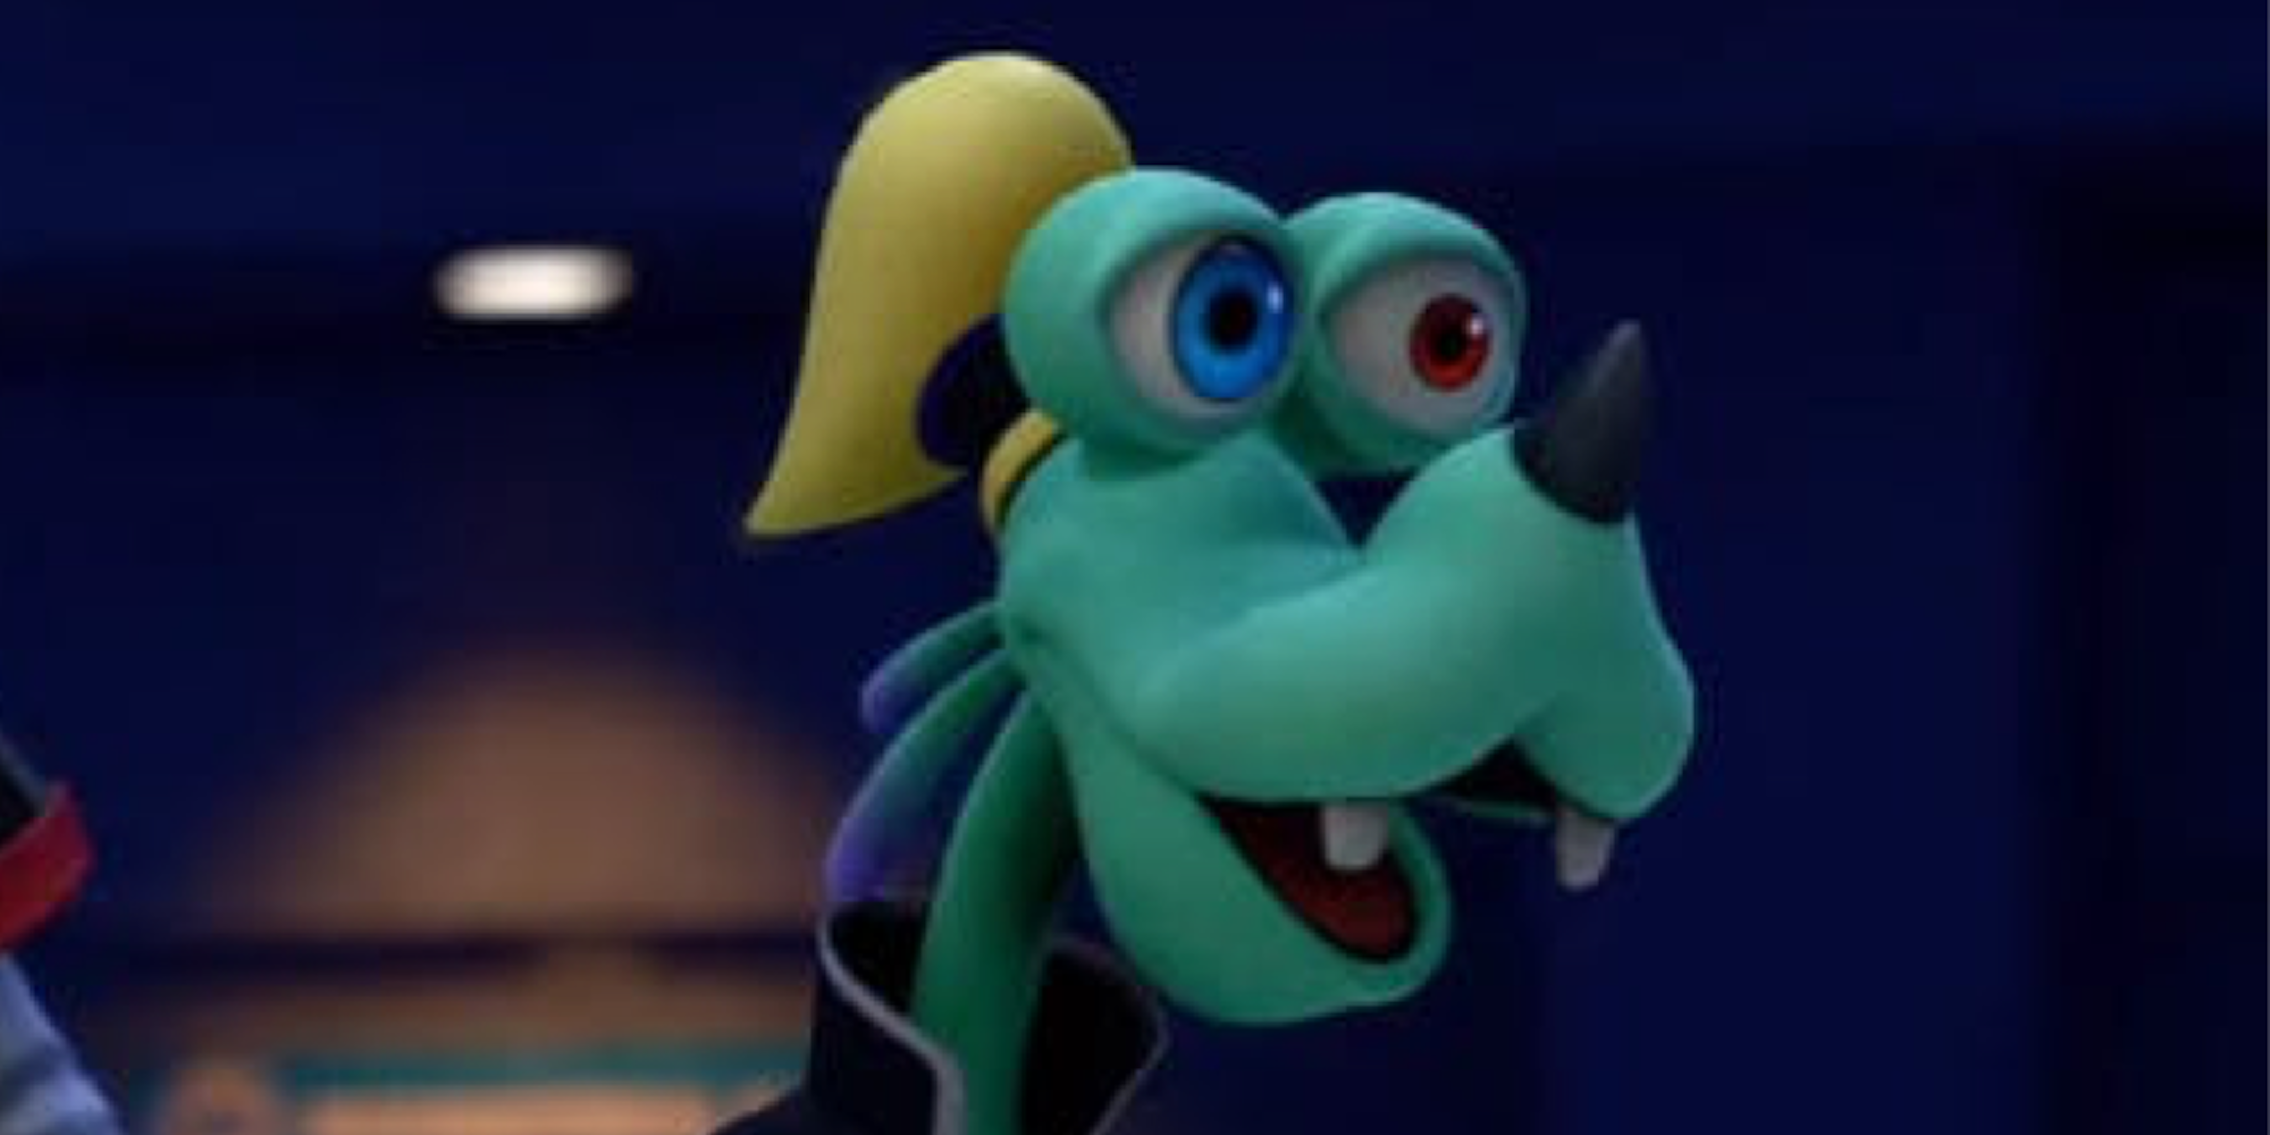 The Monsters, Inc. Goofy From 'Kingdom Hearts 3' is a Nightmare Meme